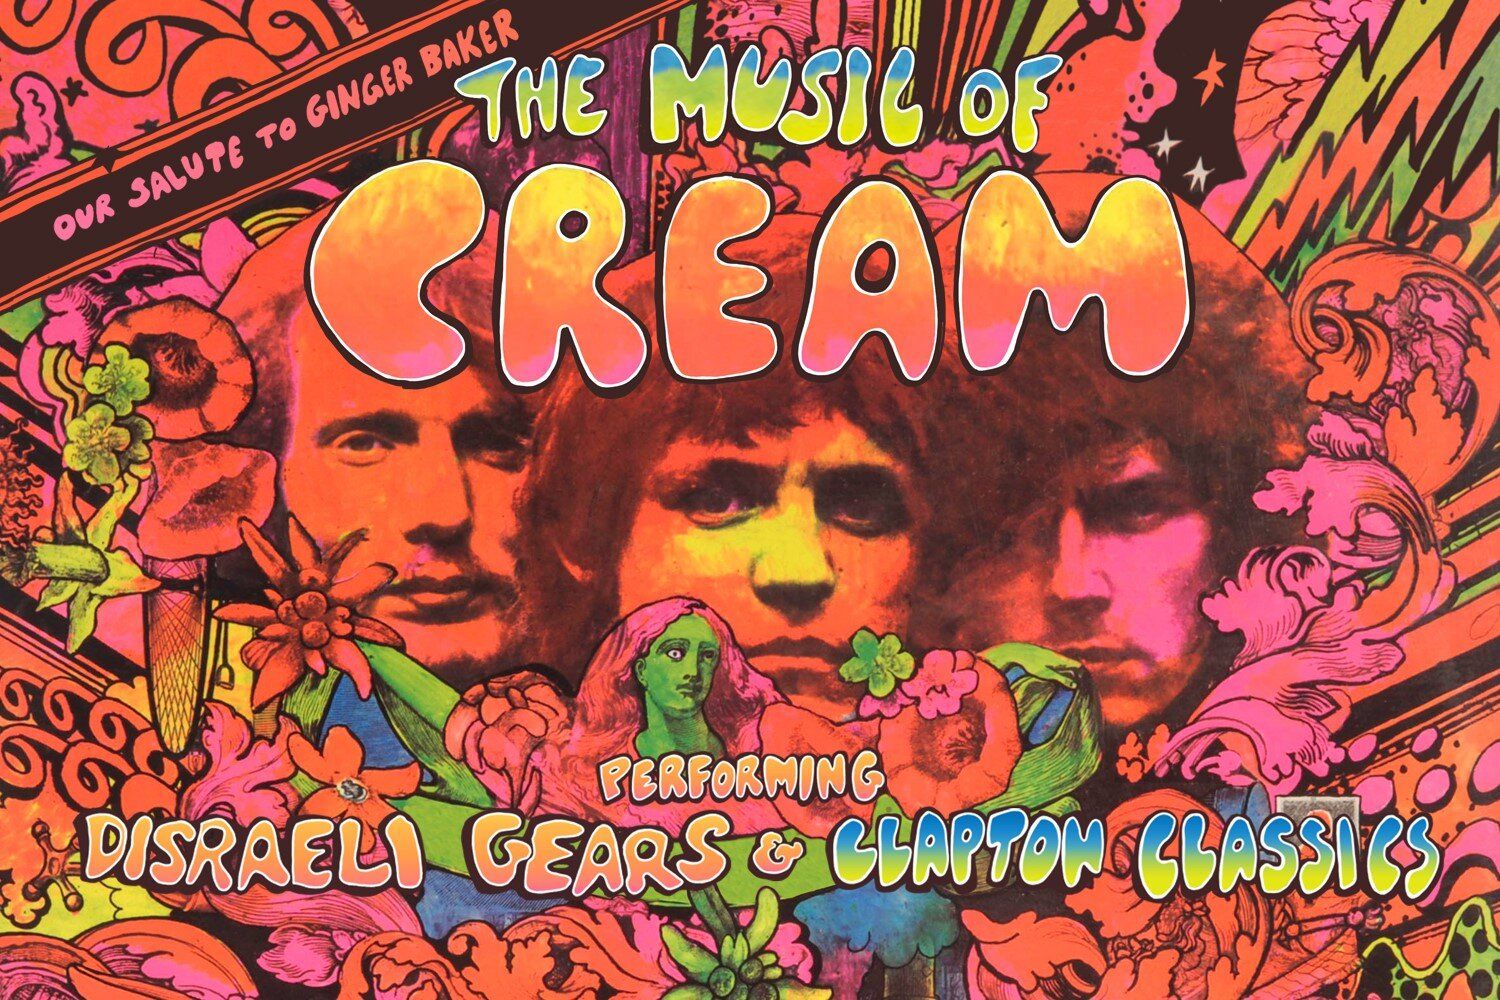 Cream Band Wallpaper.GiftWatches.CO